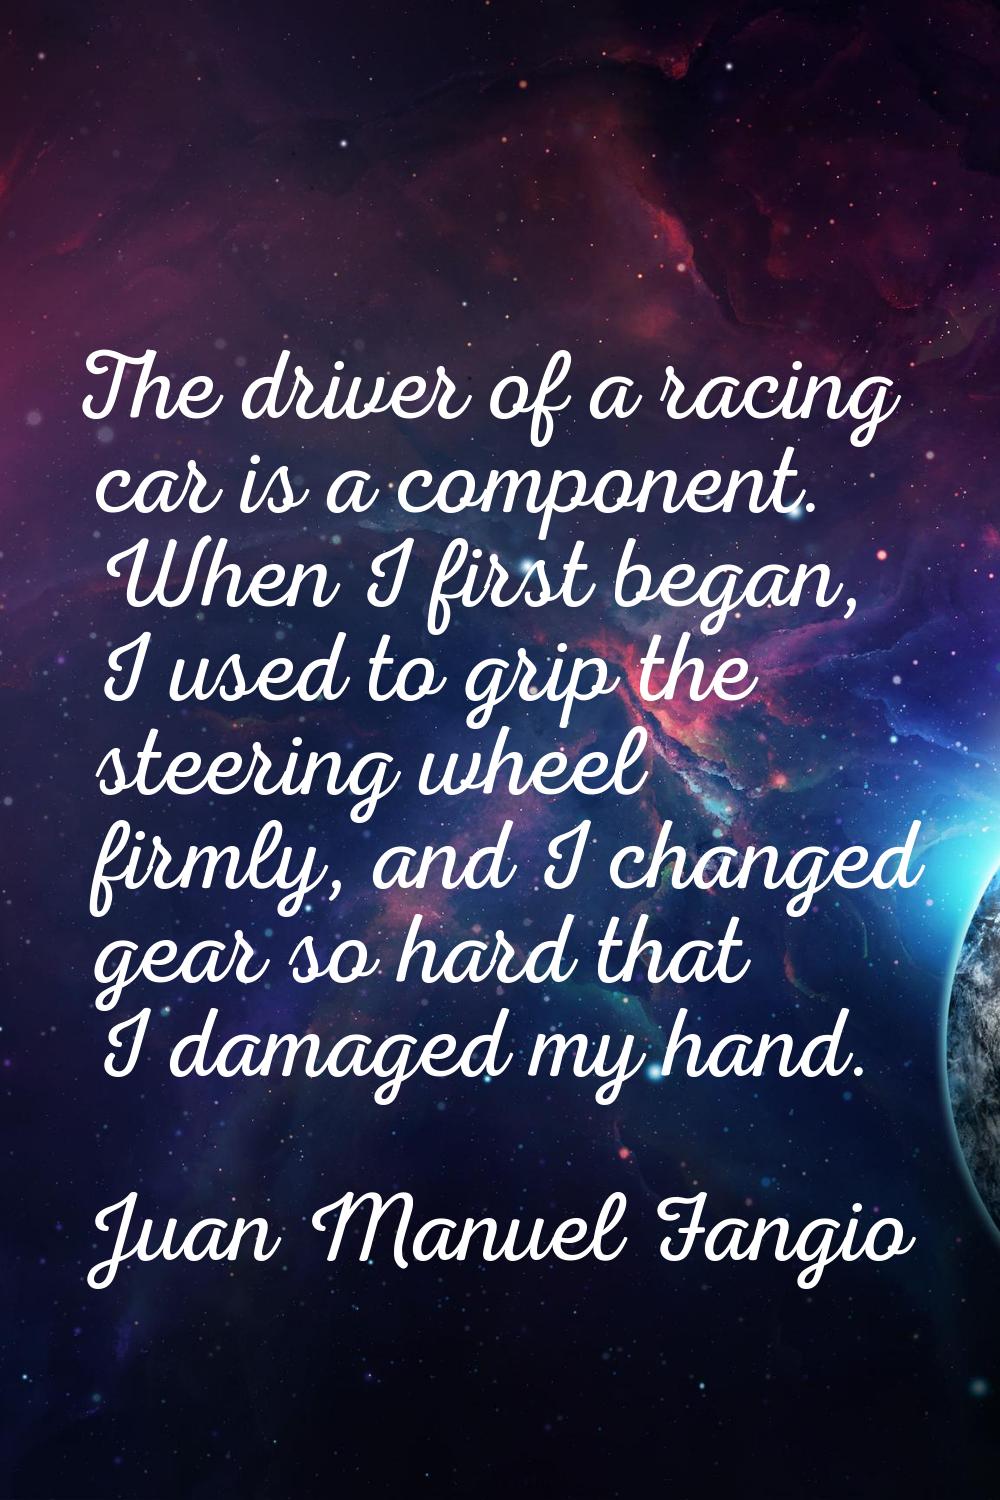 The driver of a racing car is a component. When I first began, I used to grip the steering wheel fi